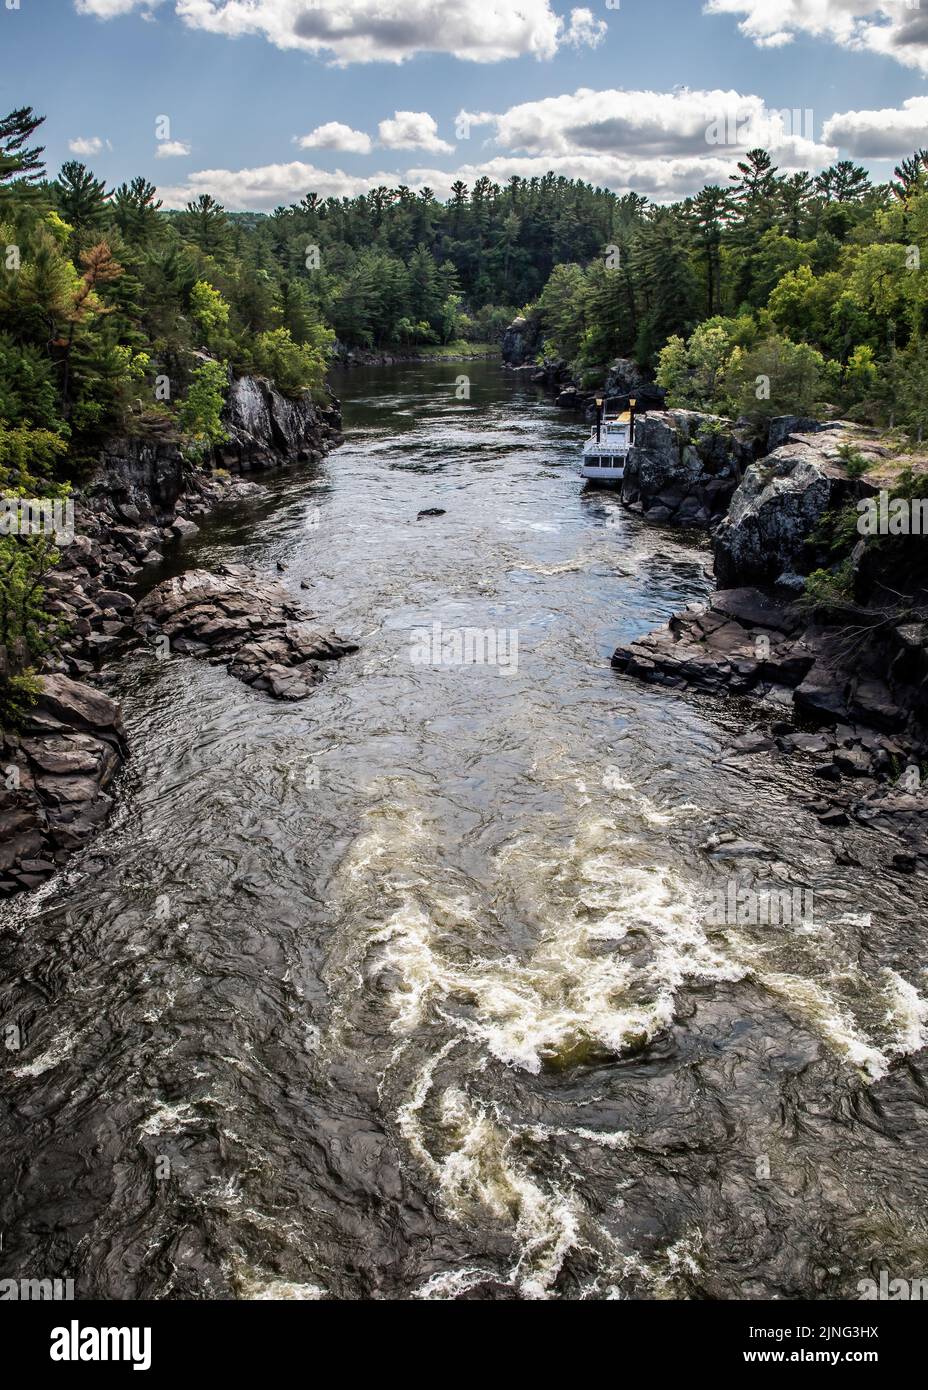 Rapids on the St. Croix River and the Taylors Falls Princess riverboat docked along the shoreline. Stock Photo